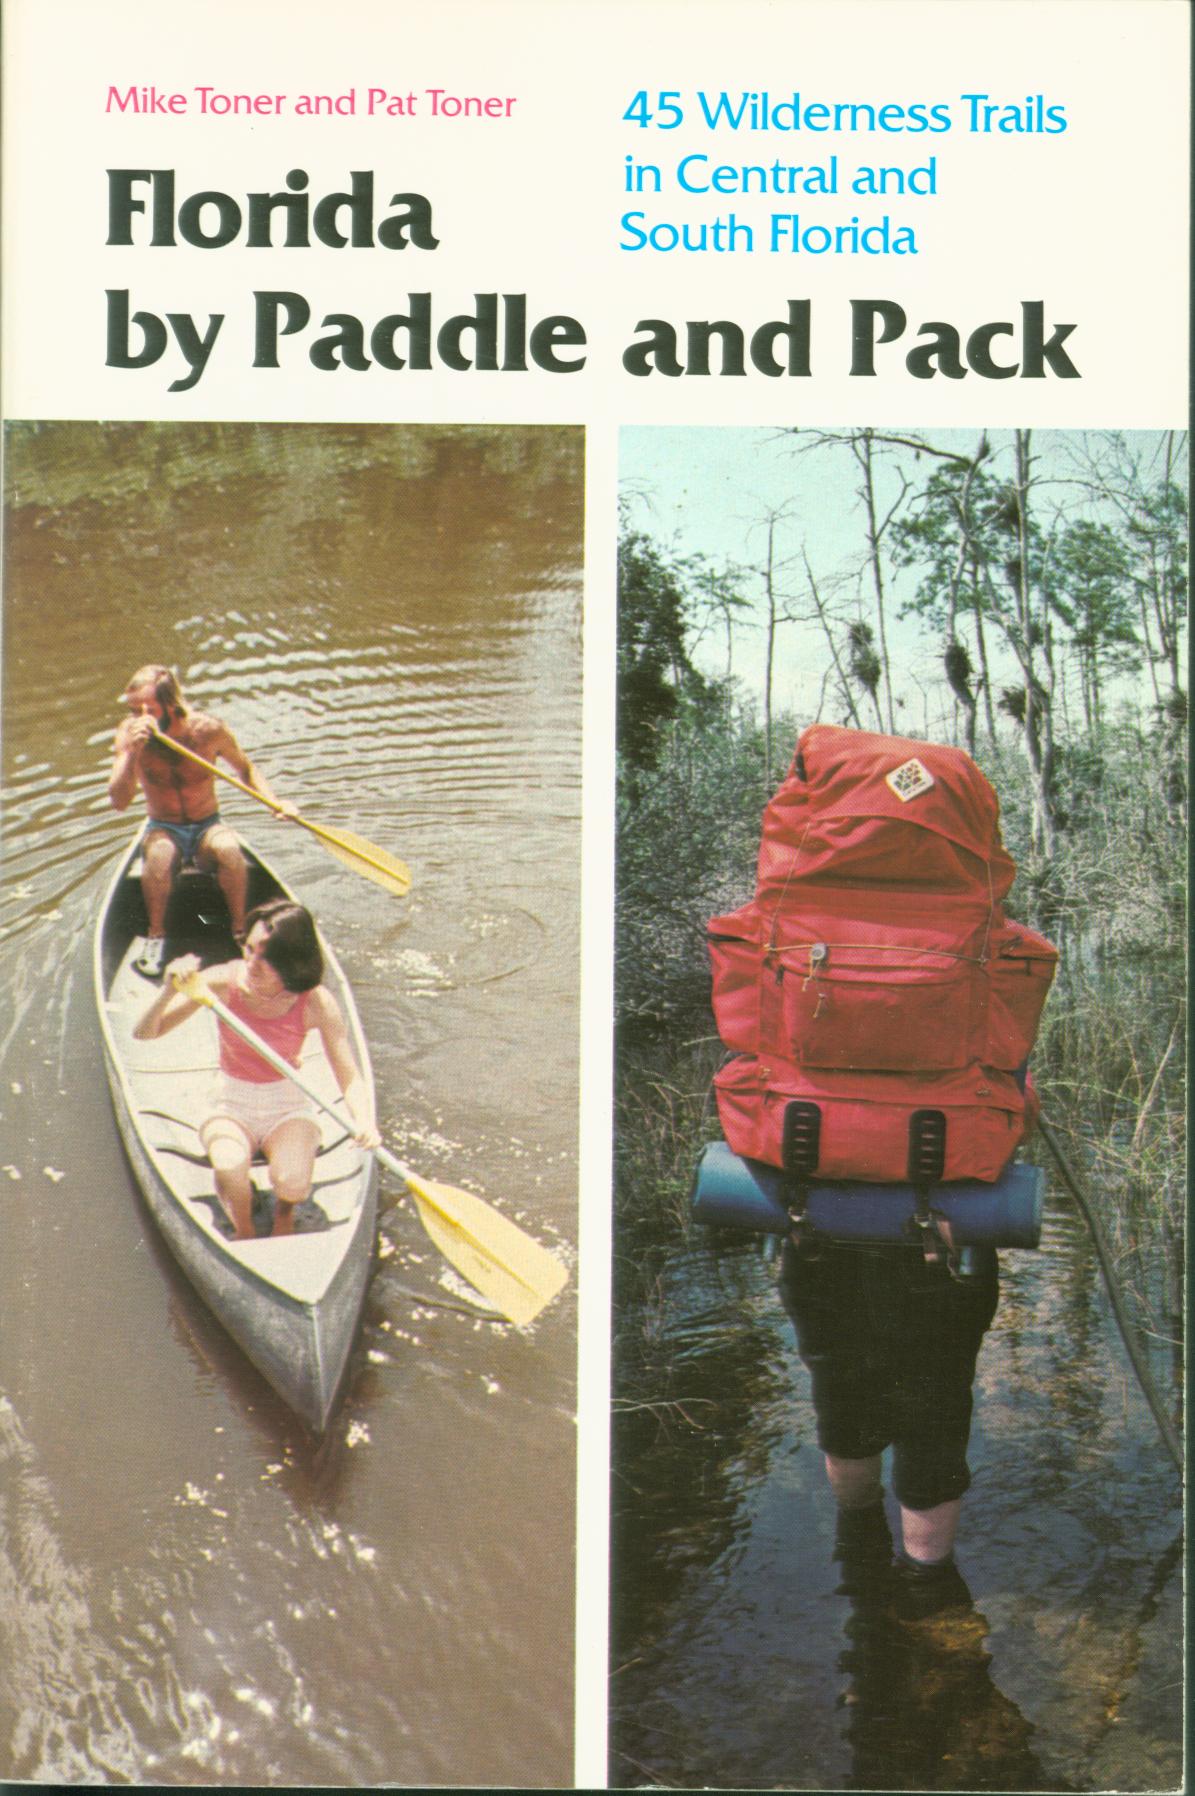 FLORIDA BY PADDLE AND PACK: 45 wilderness trails in central and south Florida.